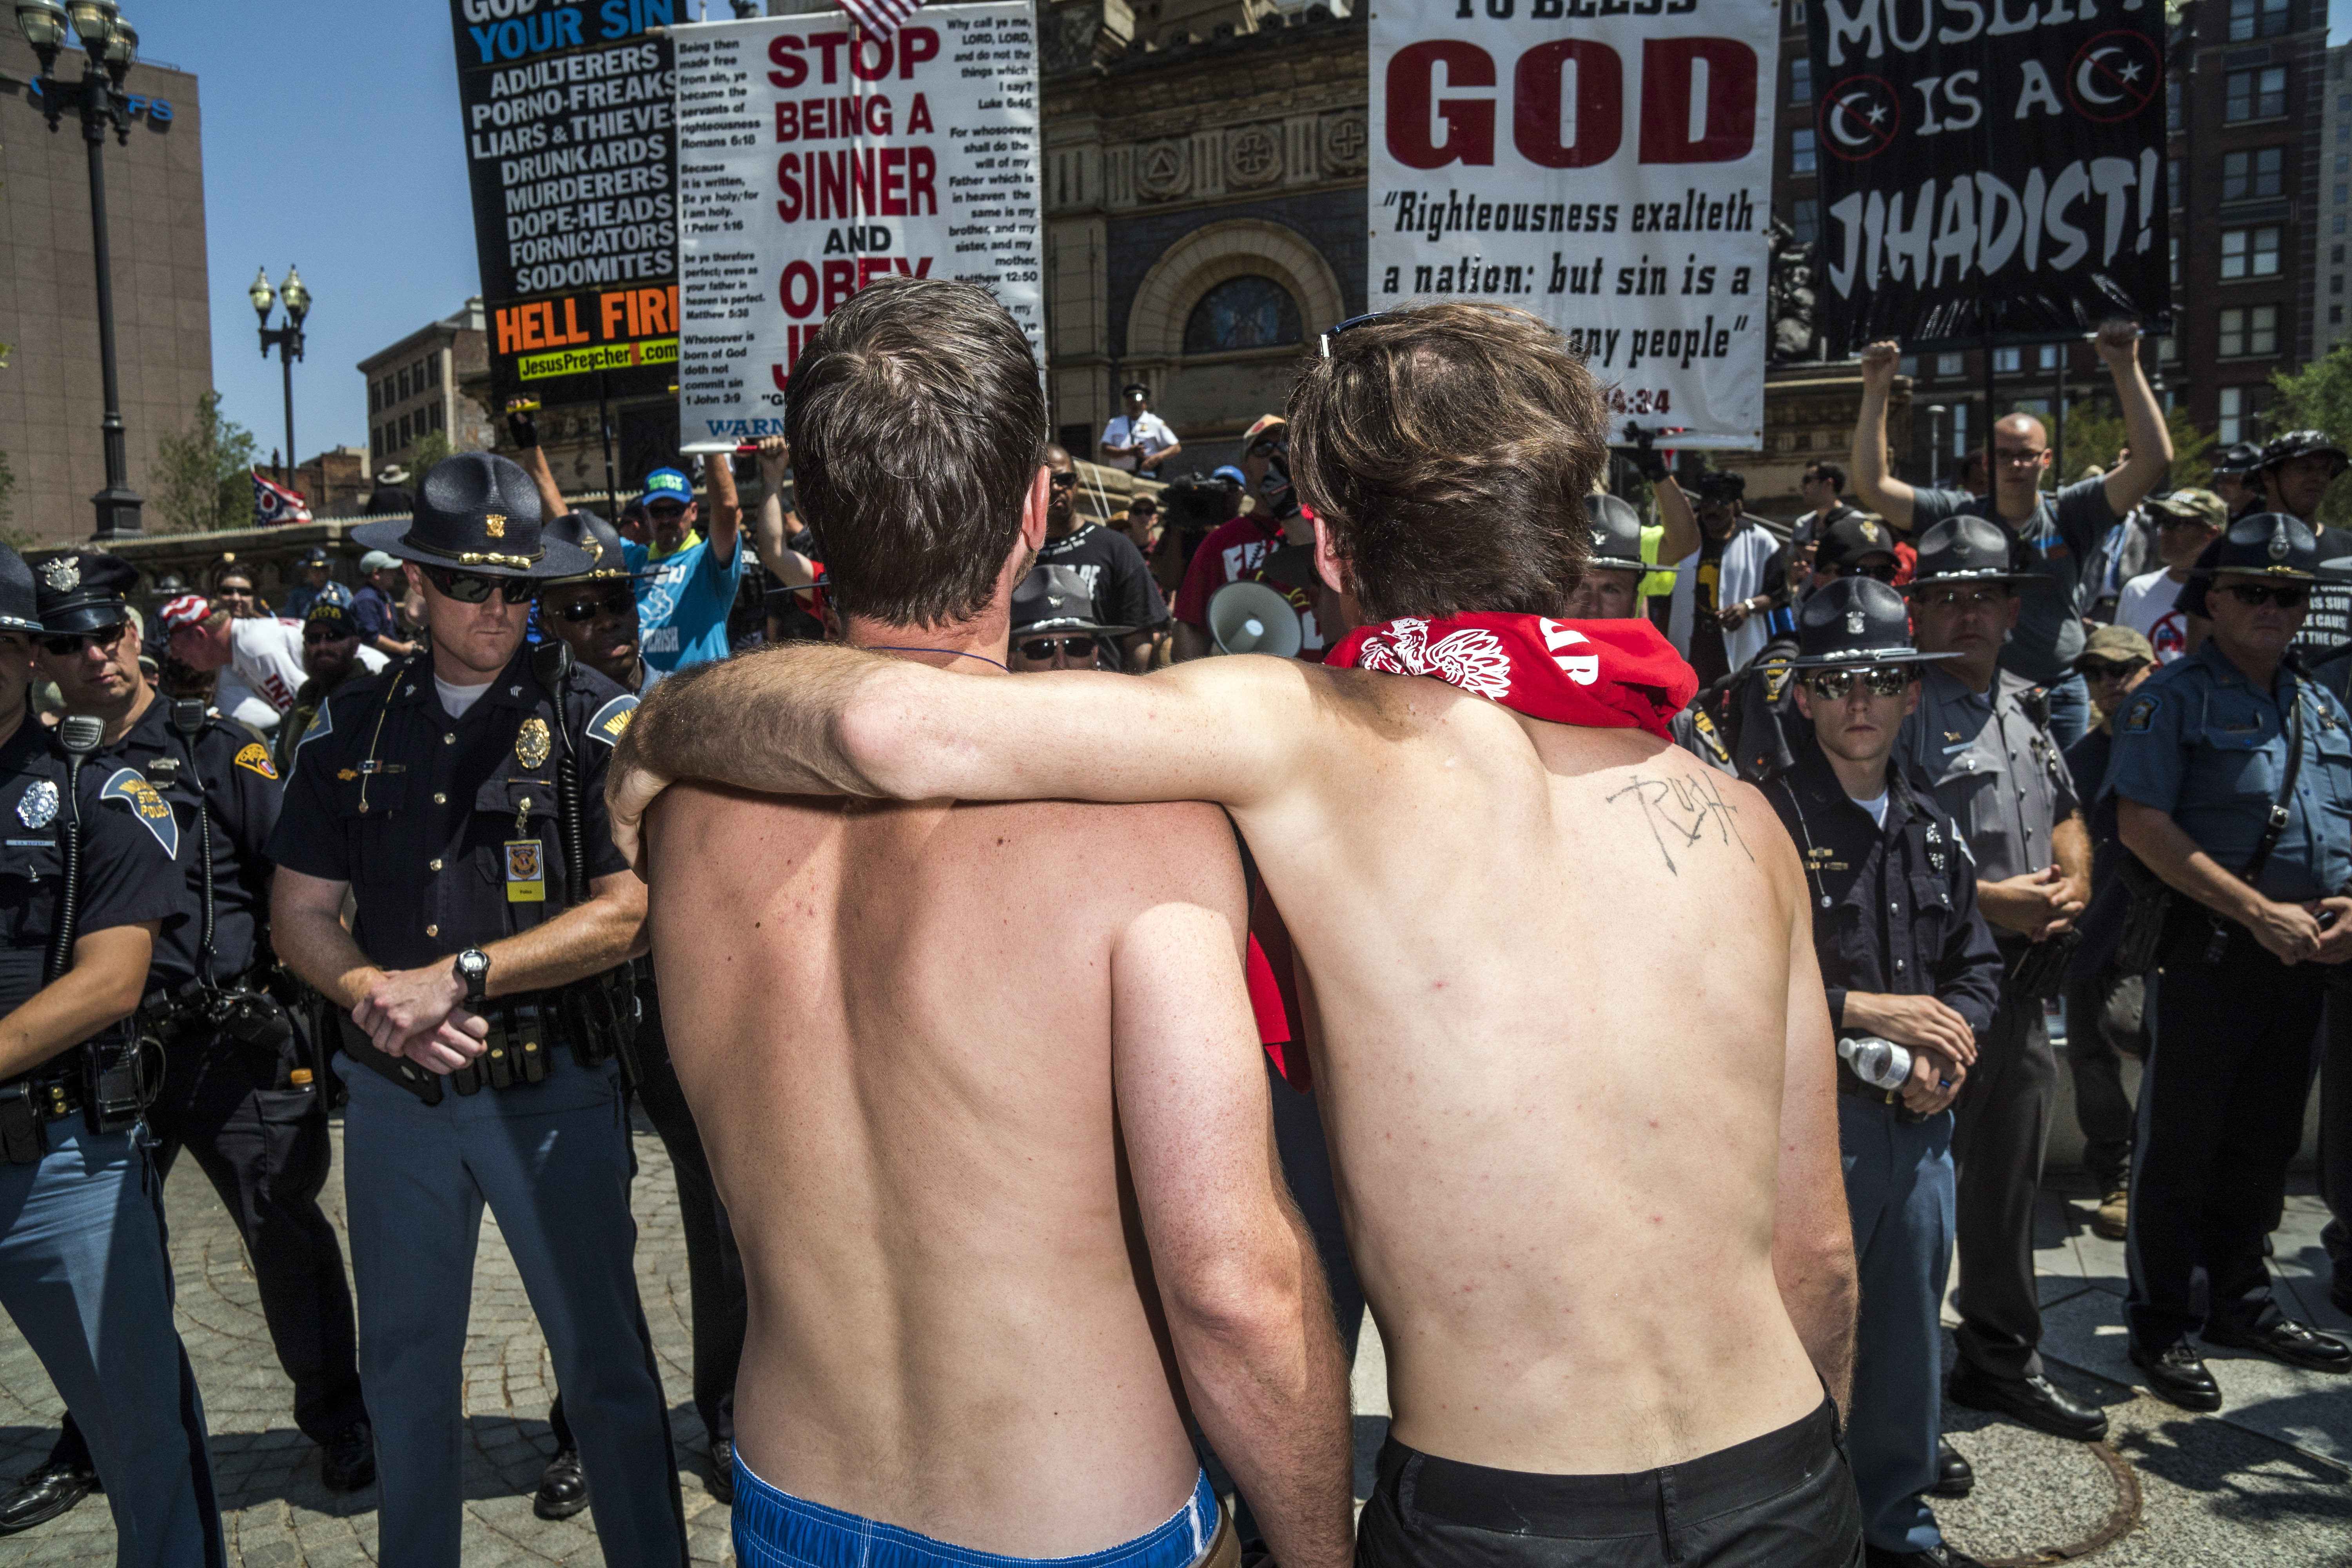 A pair of men interact with protesters in the Cleveland Public Square at the Republican National Convention in Cleveland on Tuesday, July 19, 2016.